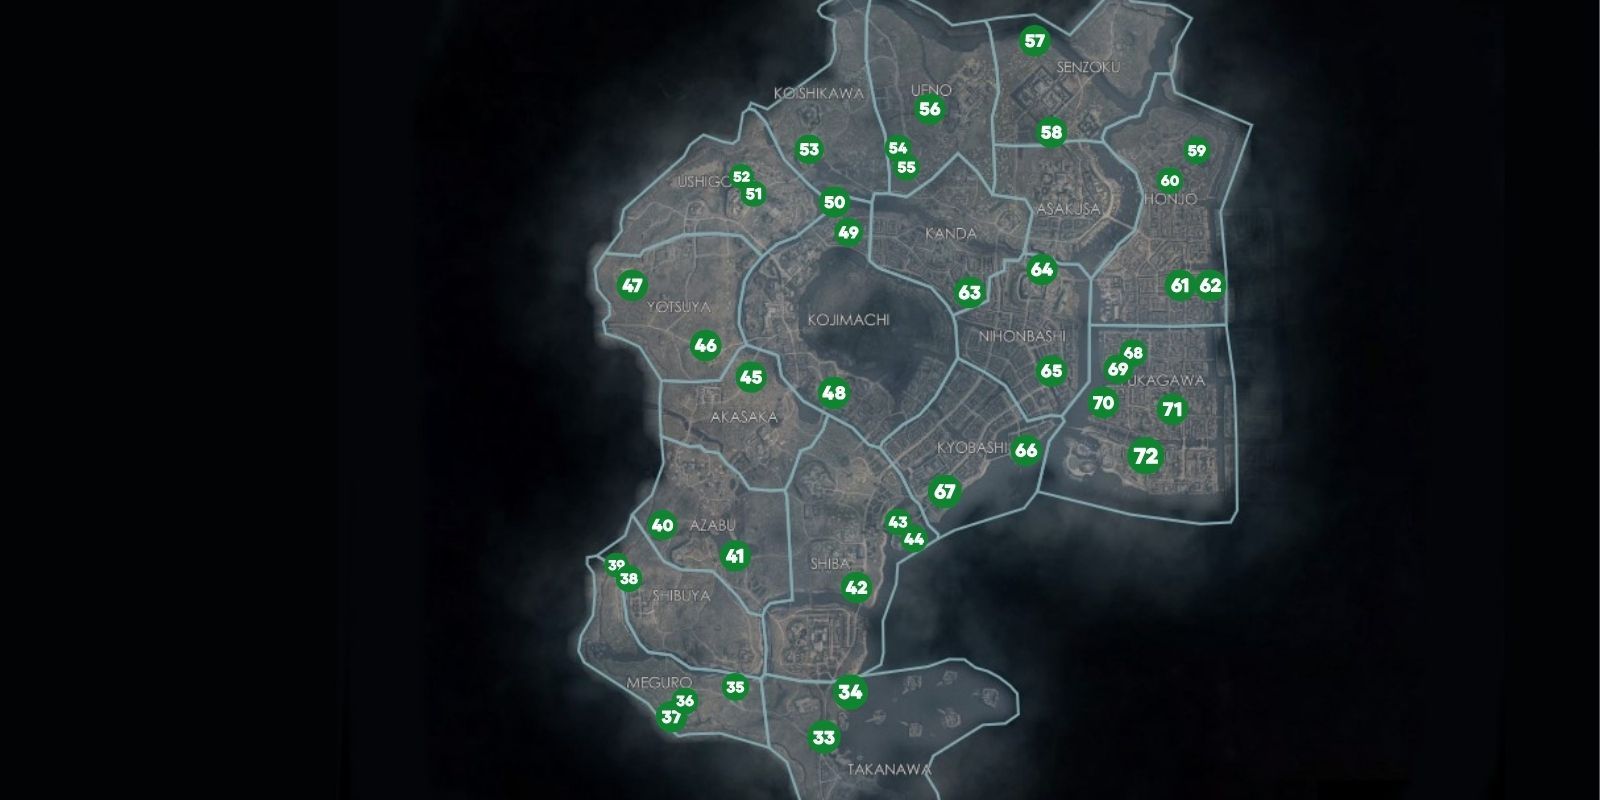 The Rise Of The Ronin character is showcasing the locations of all the Fugitives in this region.